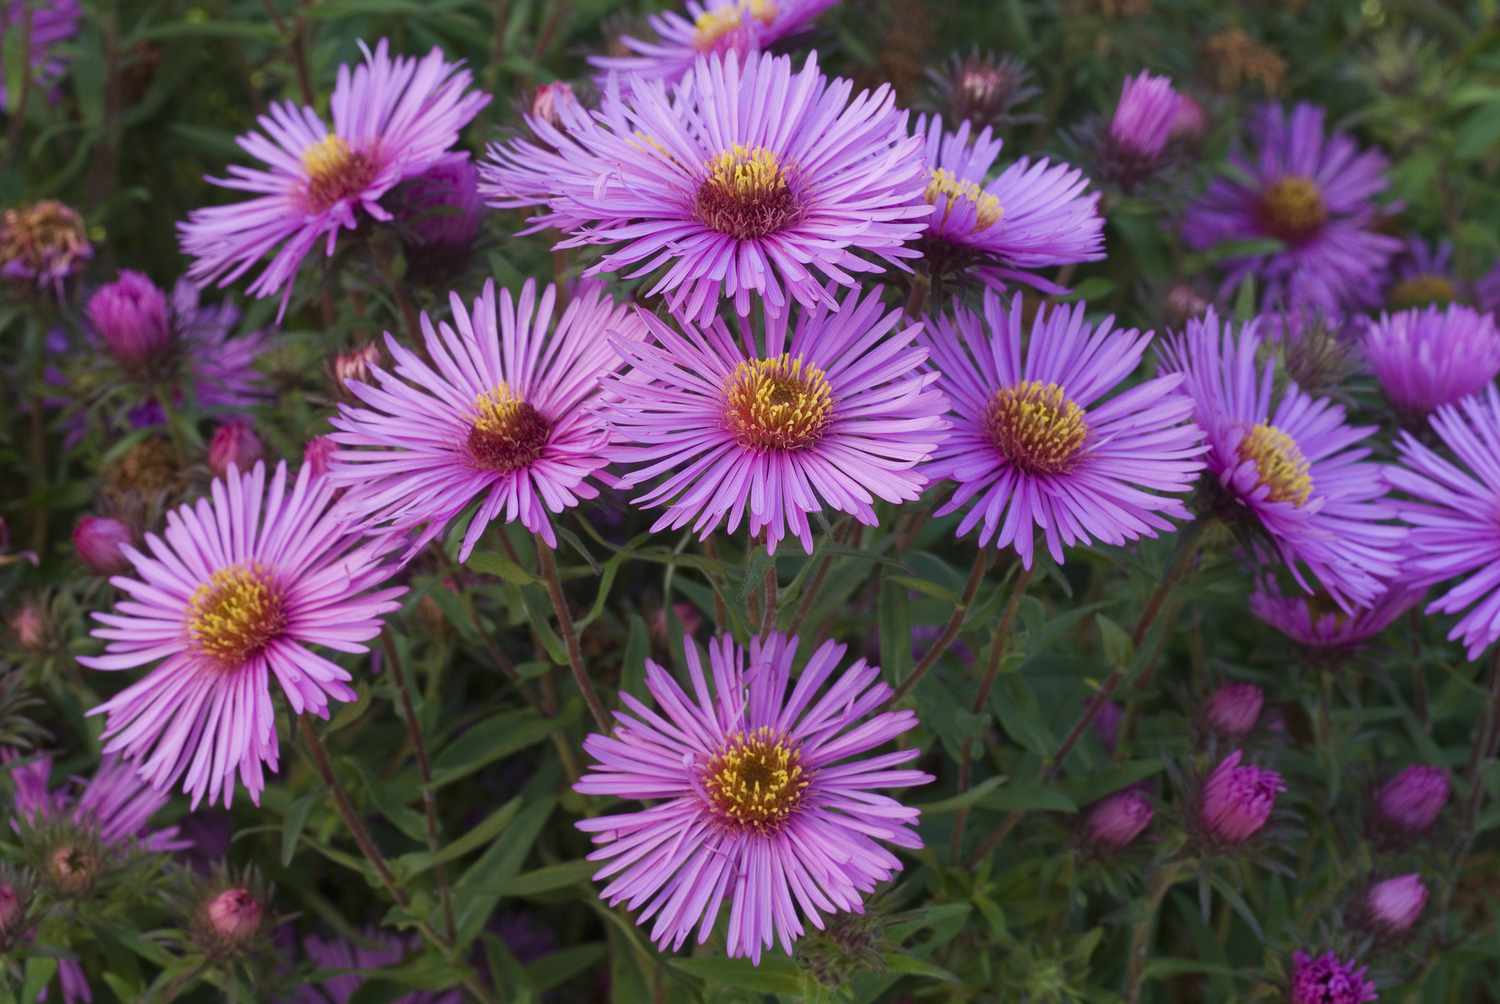 New England aster flowers with purple petals and yellow centers.